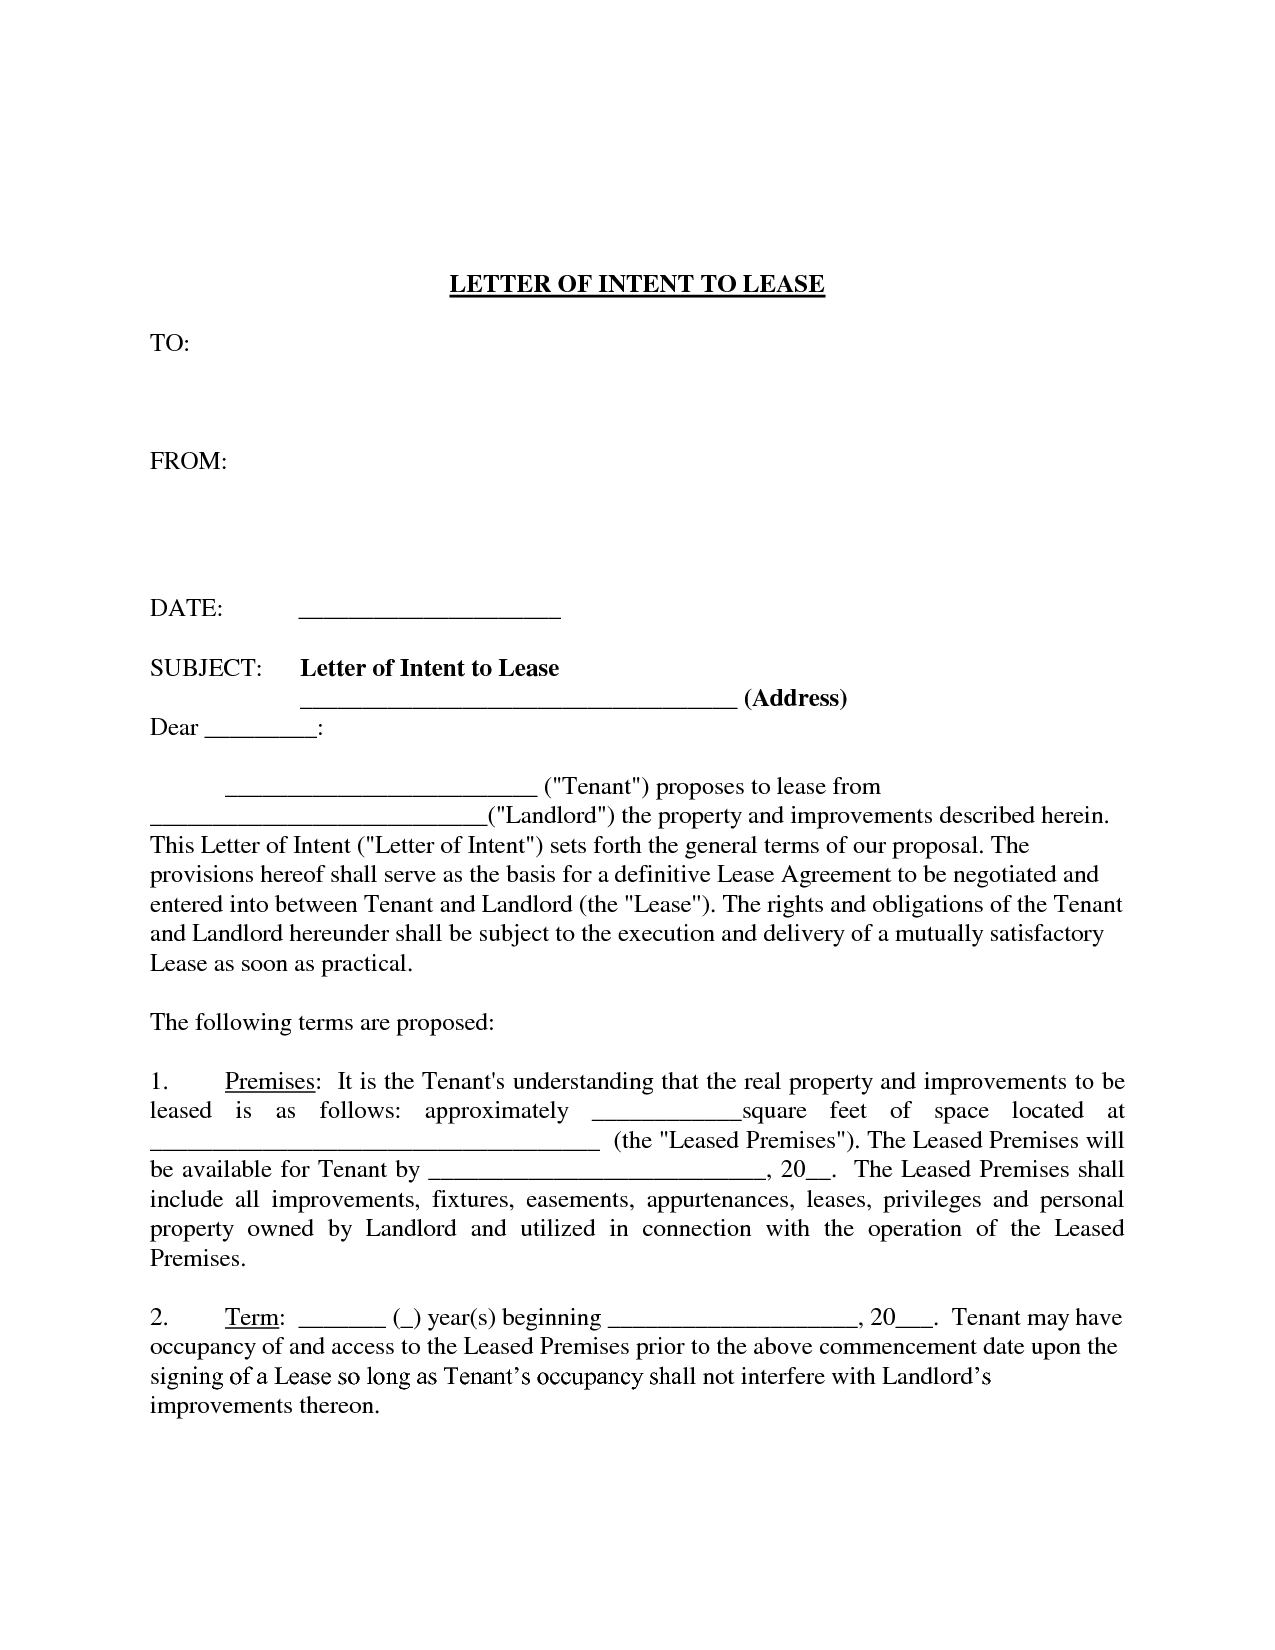 Intent to Lease Letter Template - Intent to Break Lease Letter Fice Space Template Property